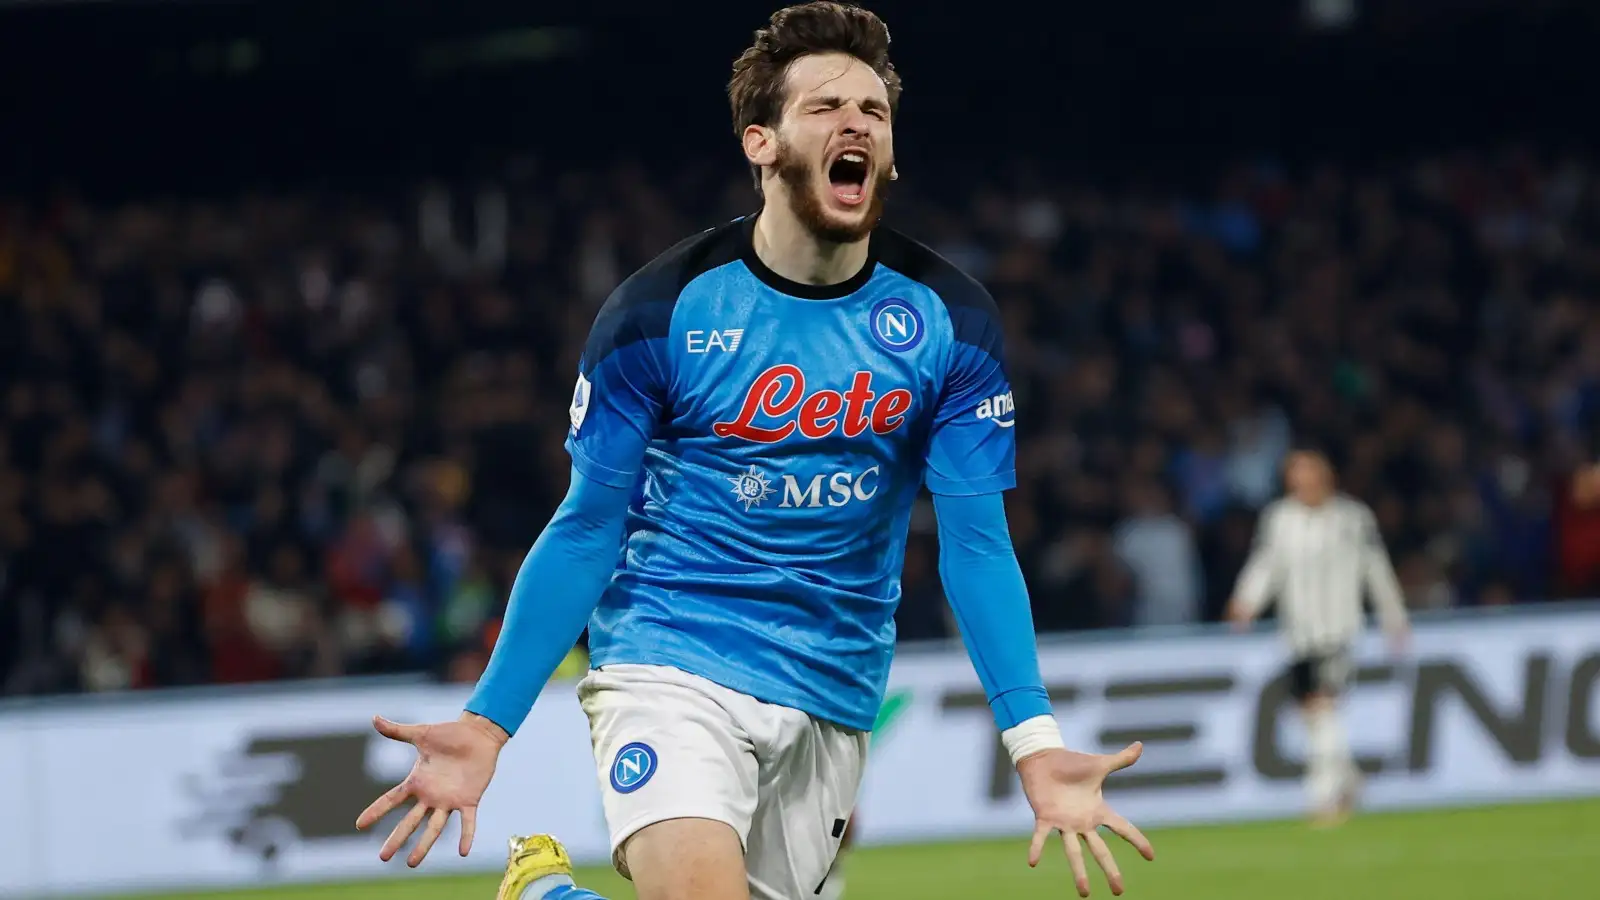 Napoli’s stunning victory over Juventus was an ode to the ‘aesthetic legacy’ of Maradona